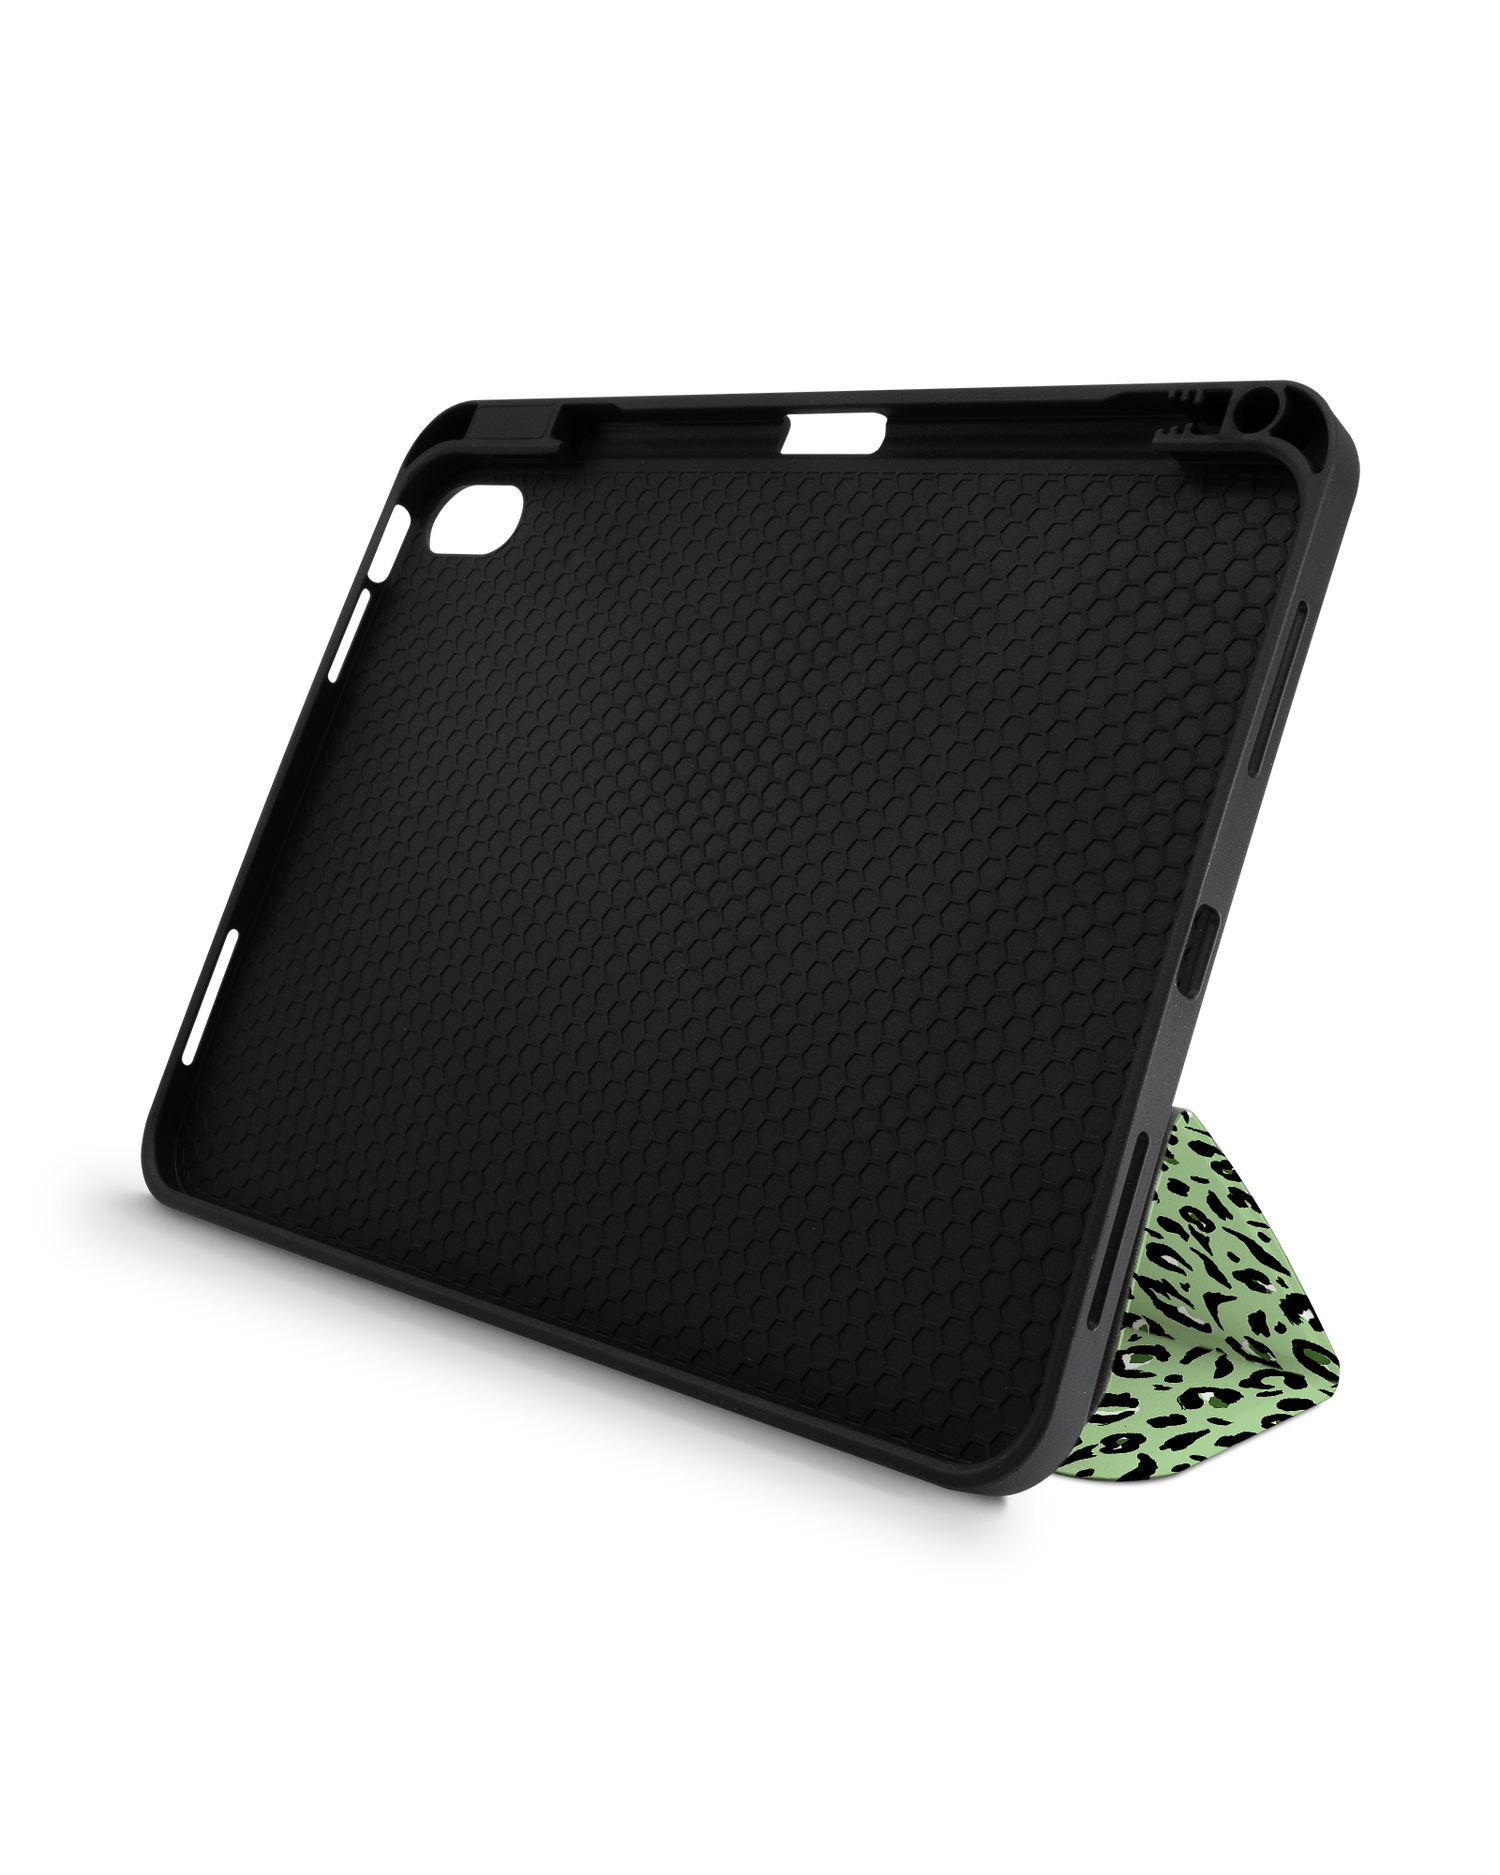 Mint Leopard iPad Case with Pencil Holder for Apple iPad (10th Generation): Set up in landscape format (front view)